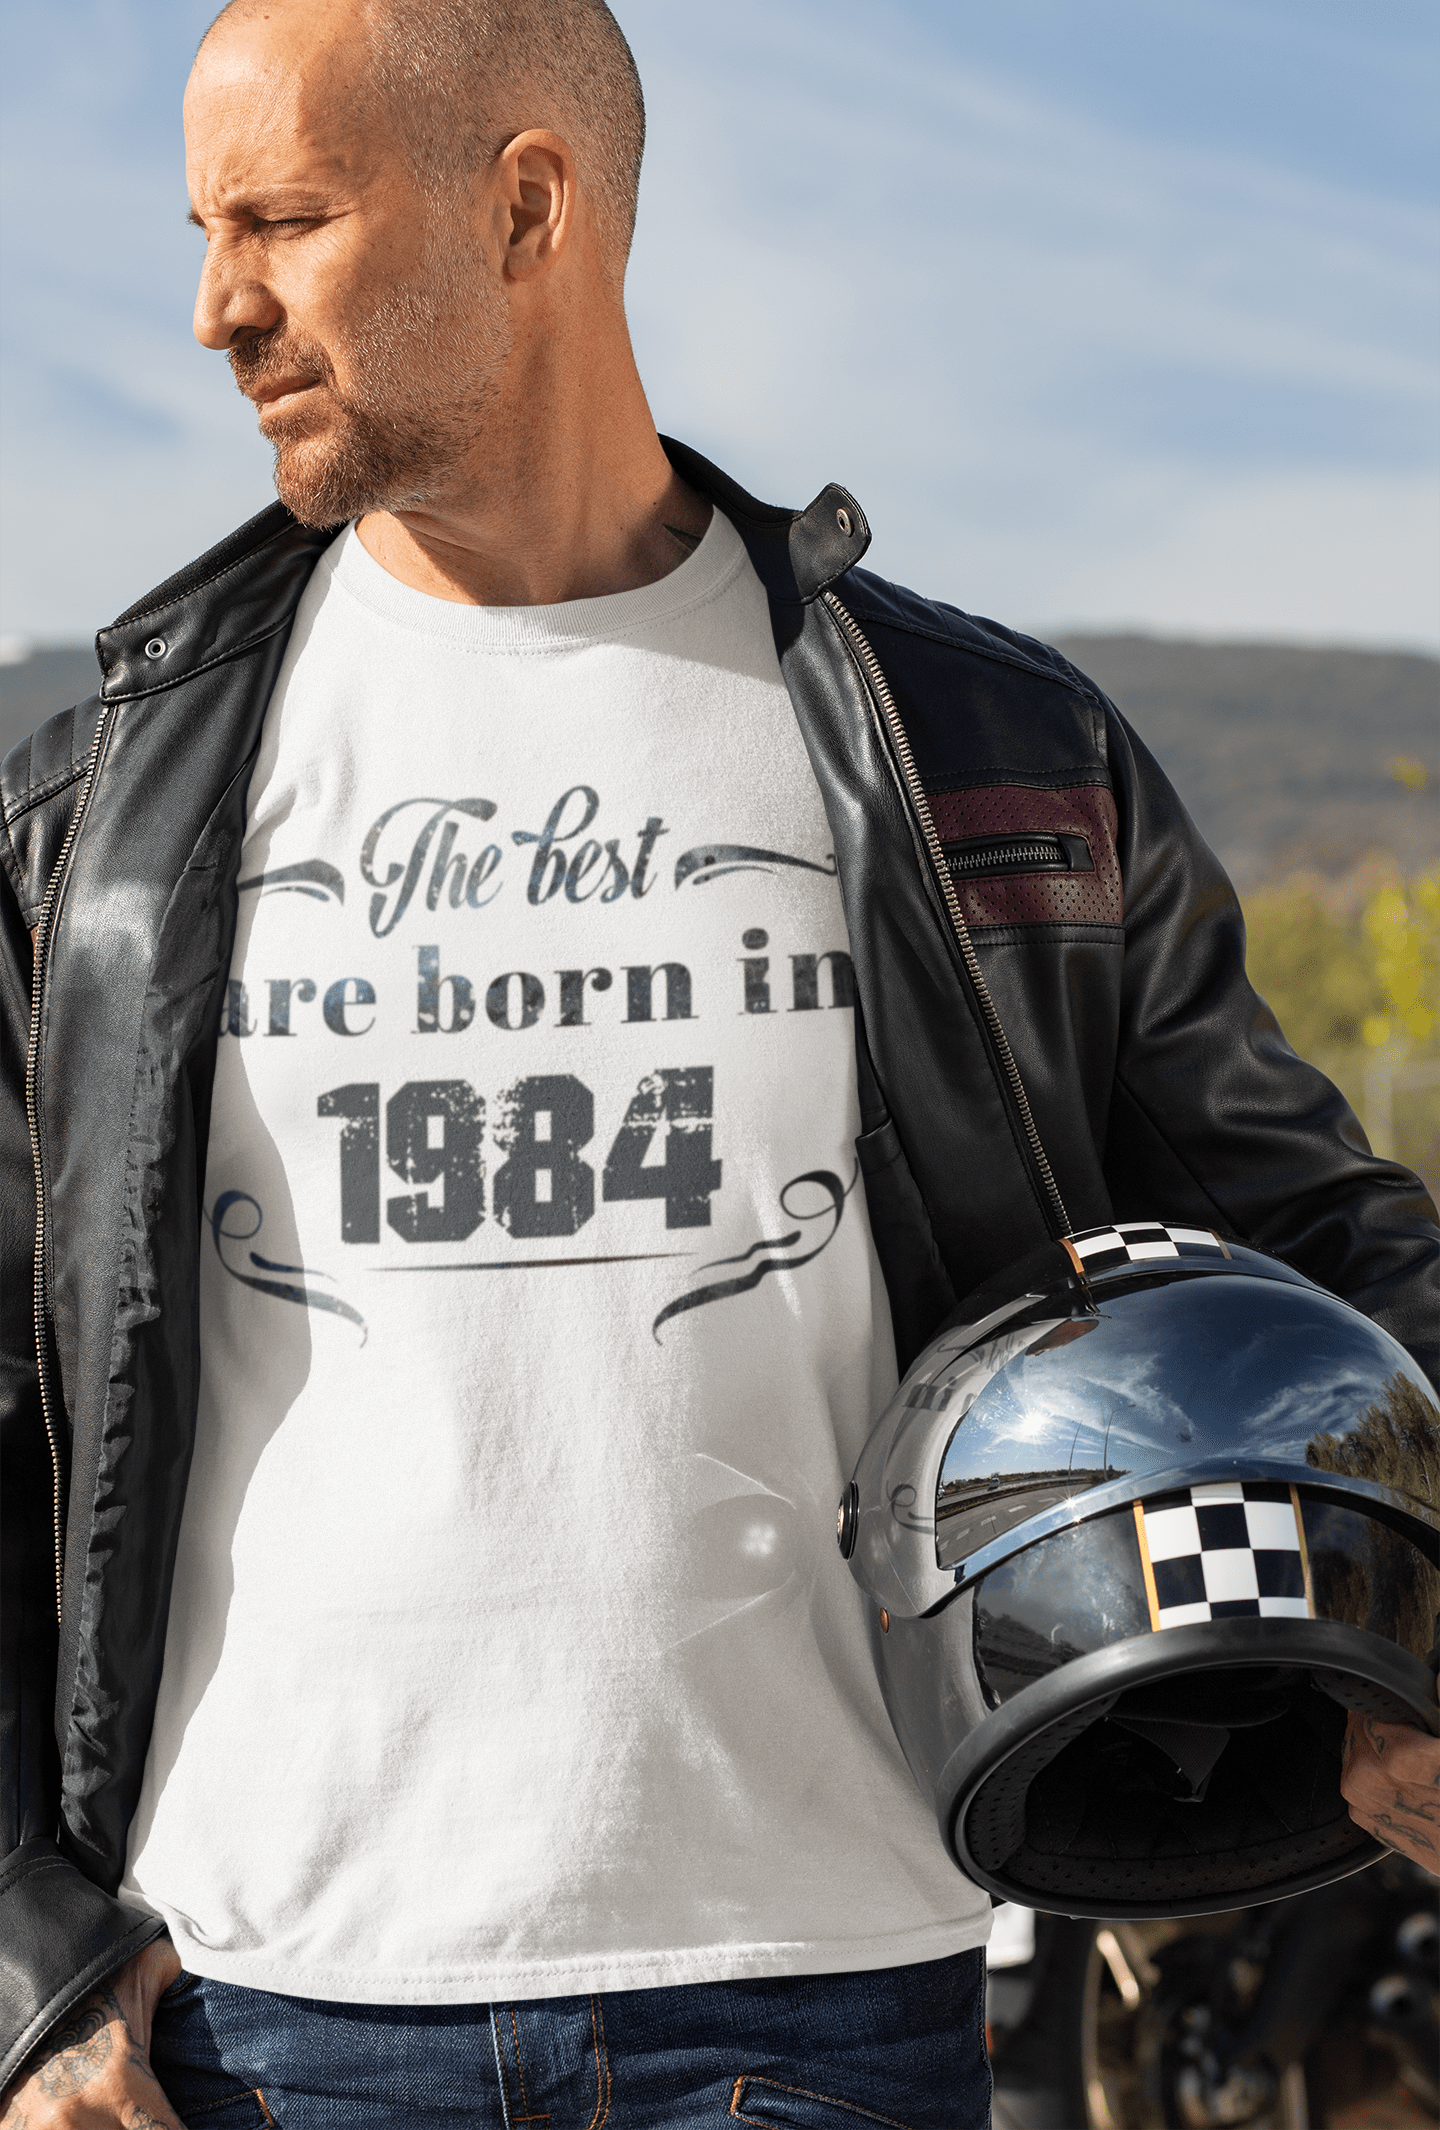 The Best are Born in 1984 Men's T-shirt White Birthday Gift 00398